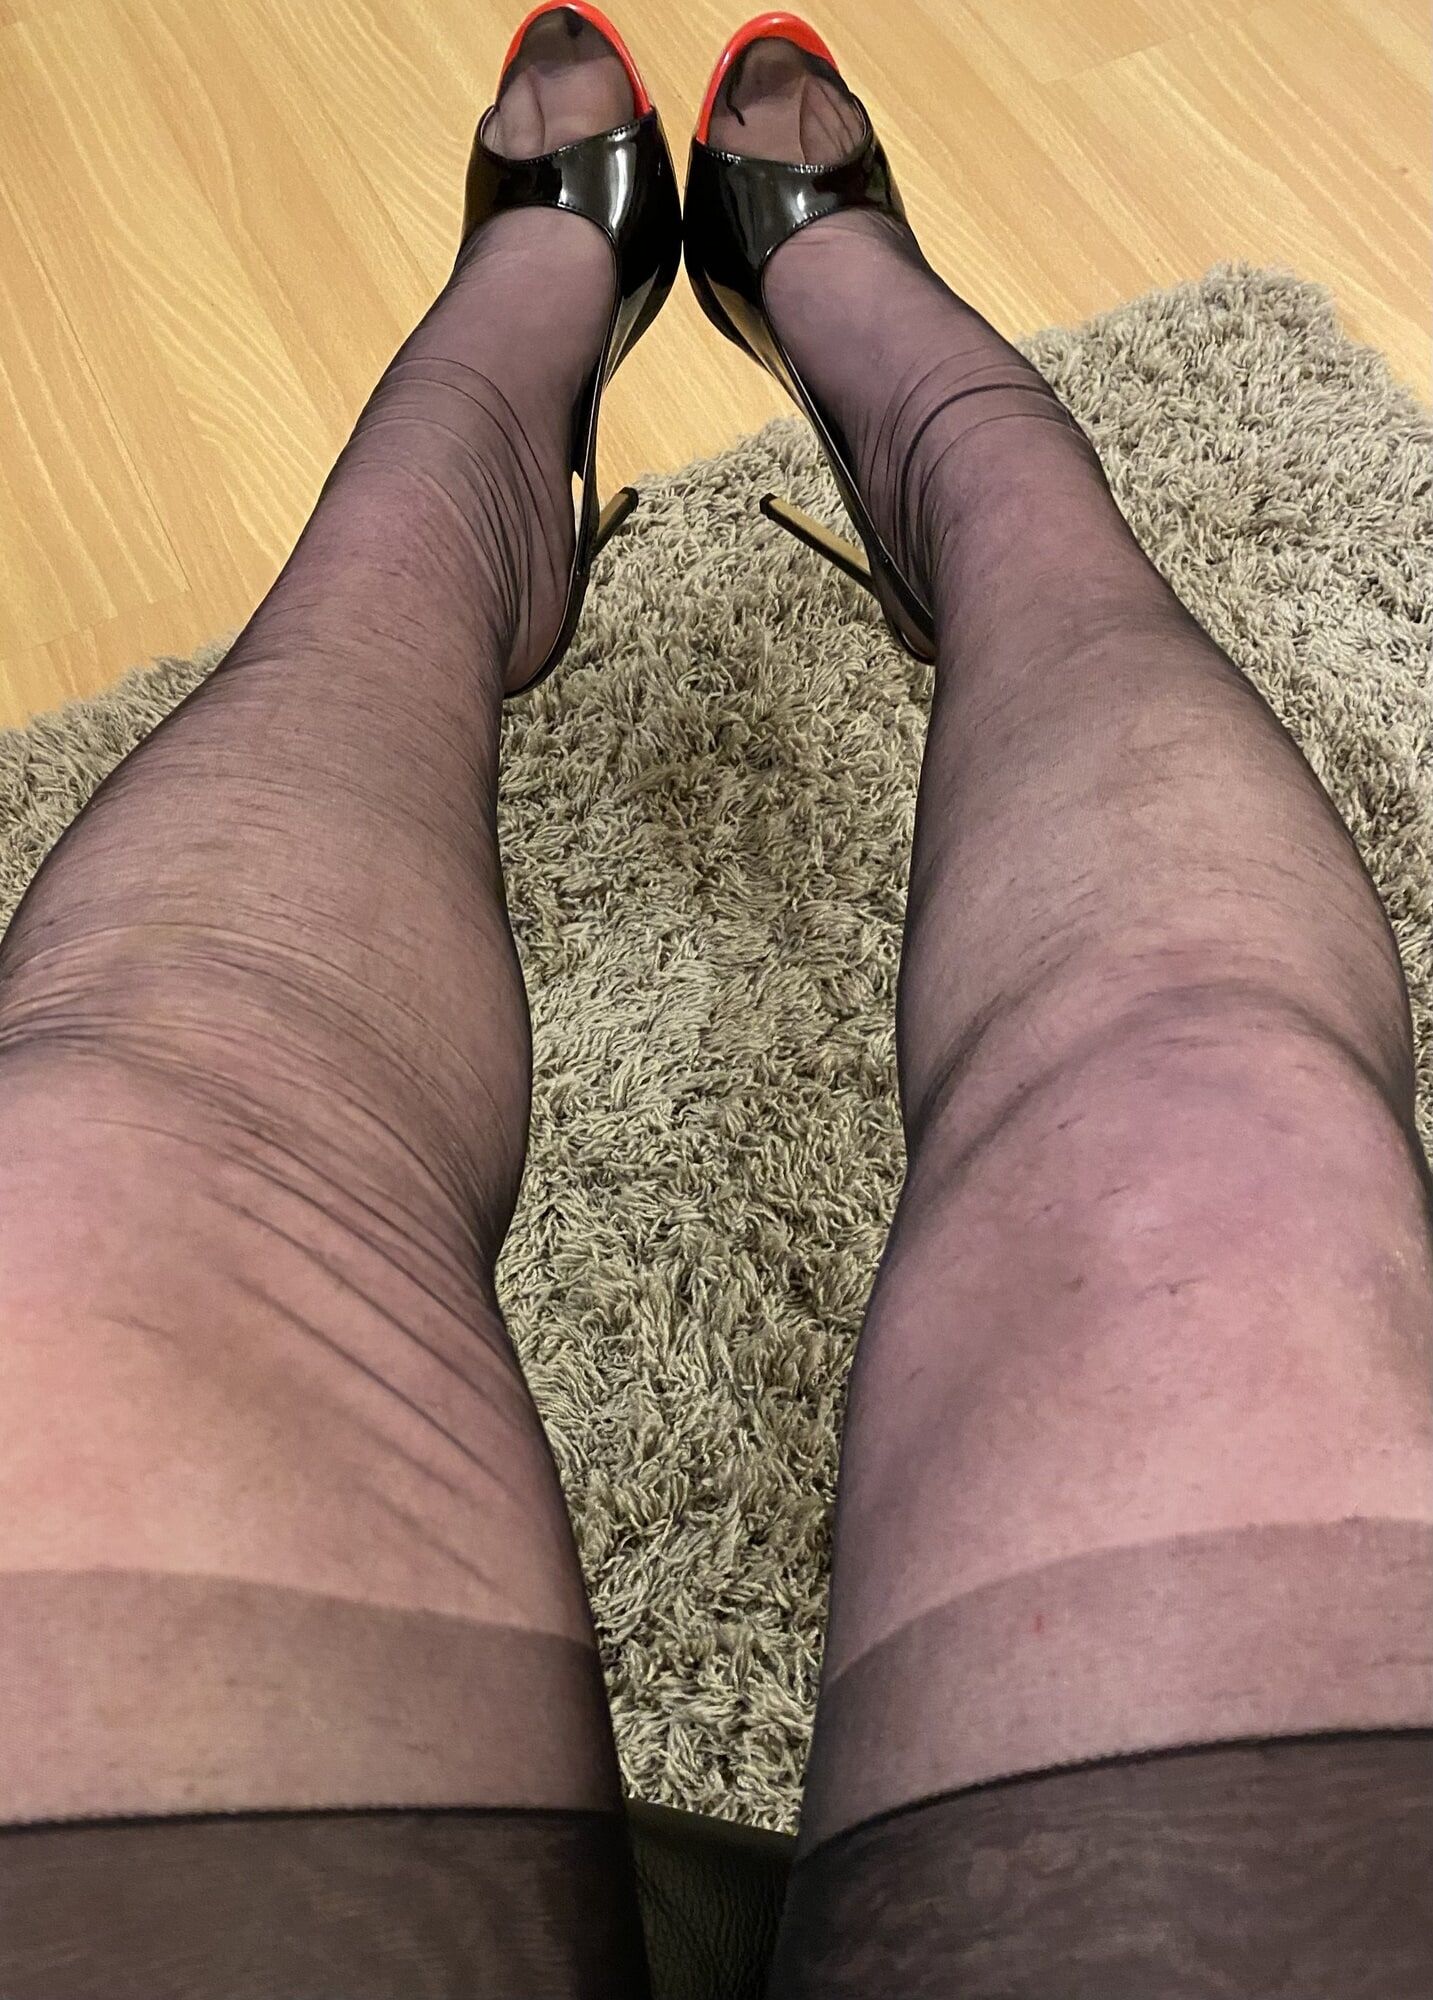 New sheer nylons and heels #3